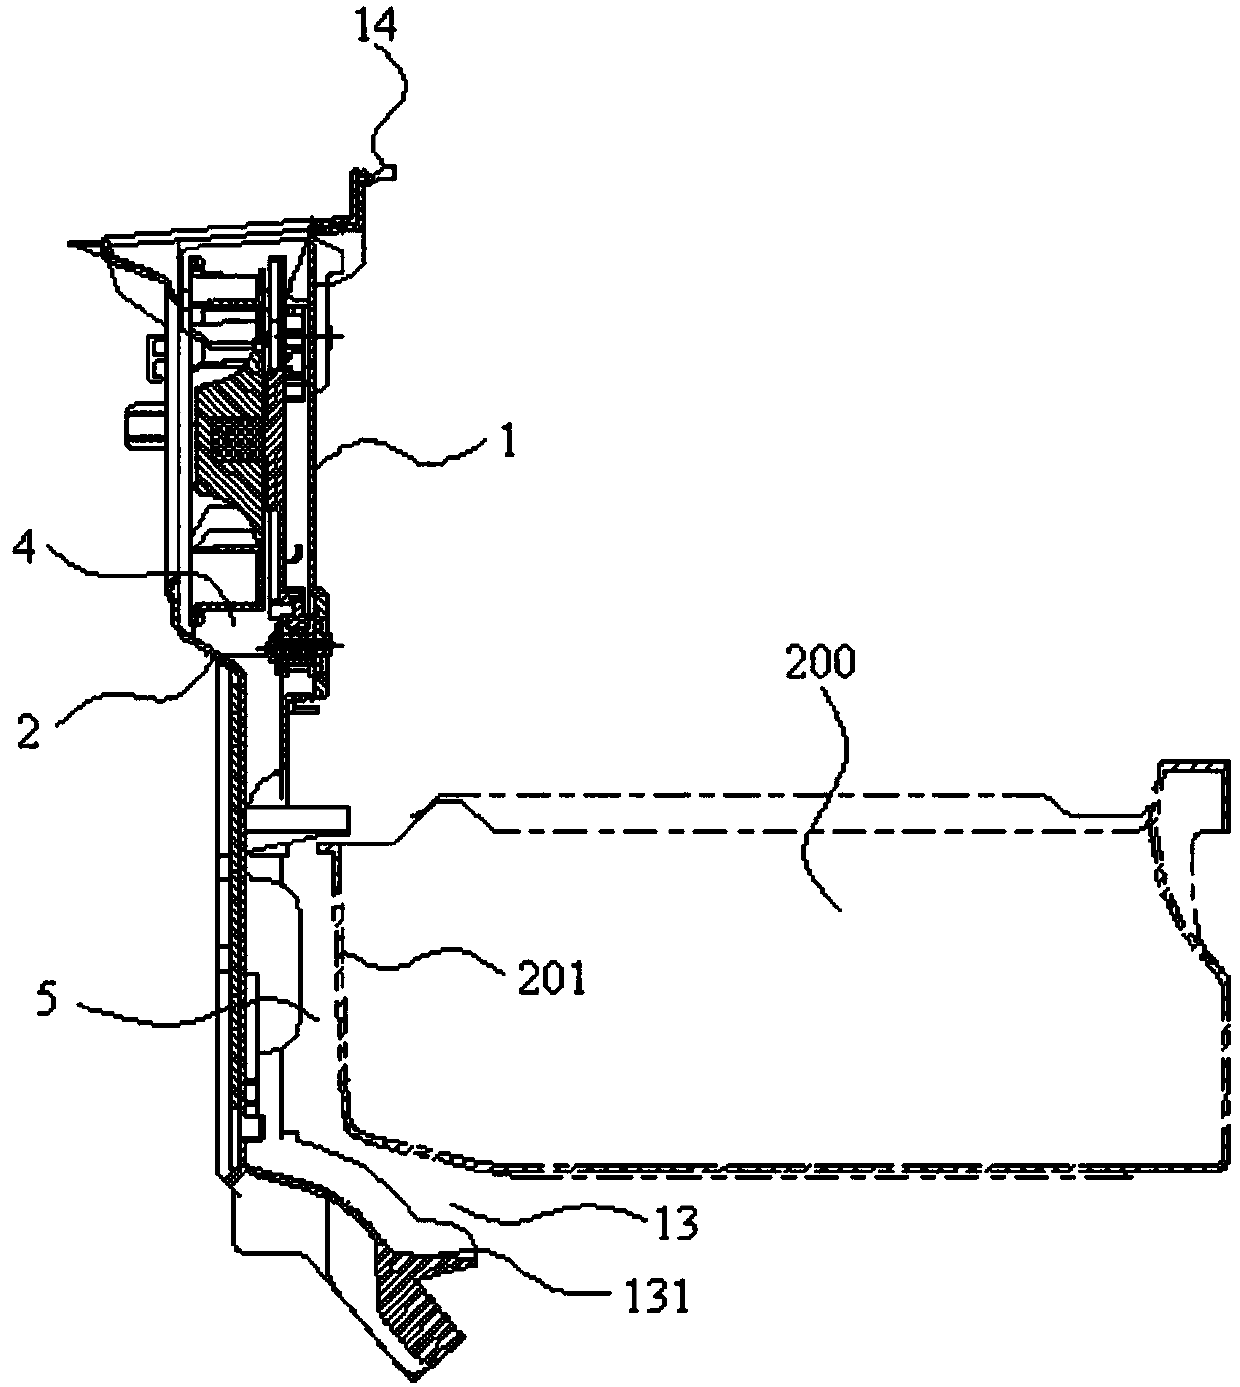 Air duct assembly of air-cooled refrigerator and air-cooled refrigerator